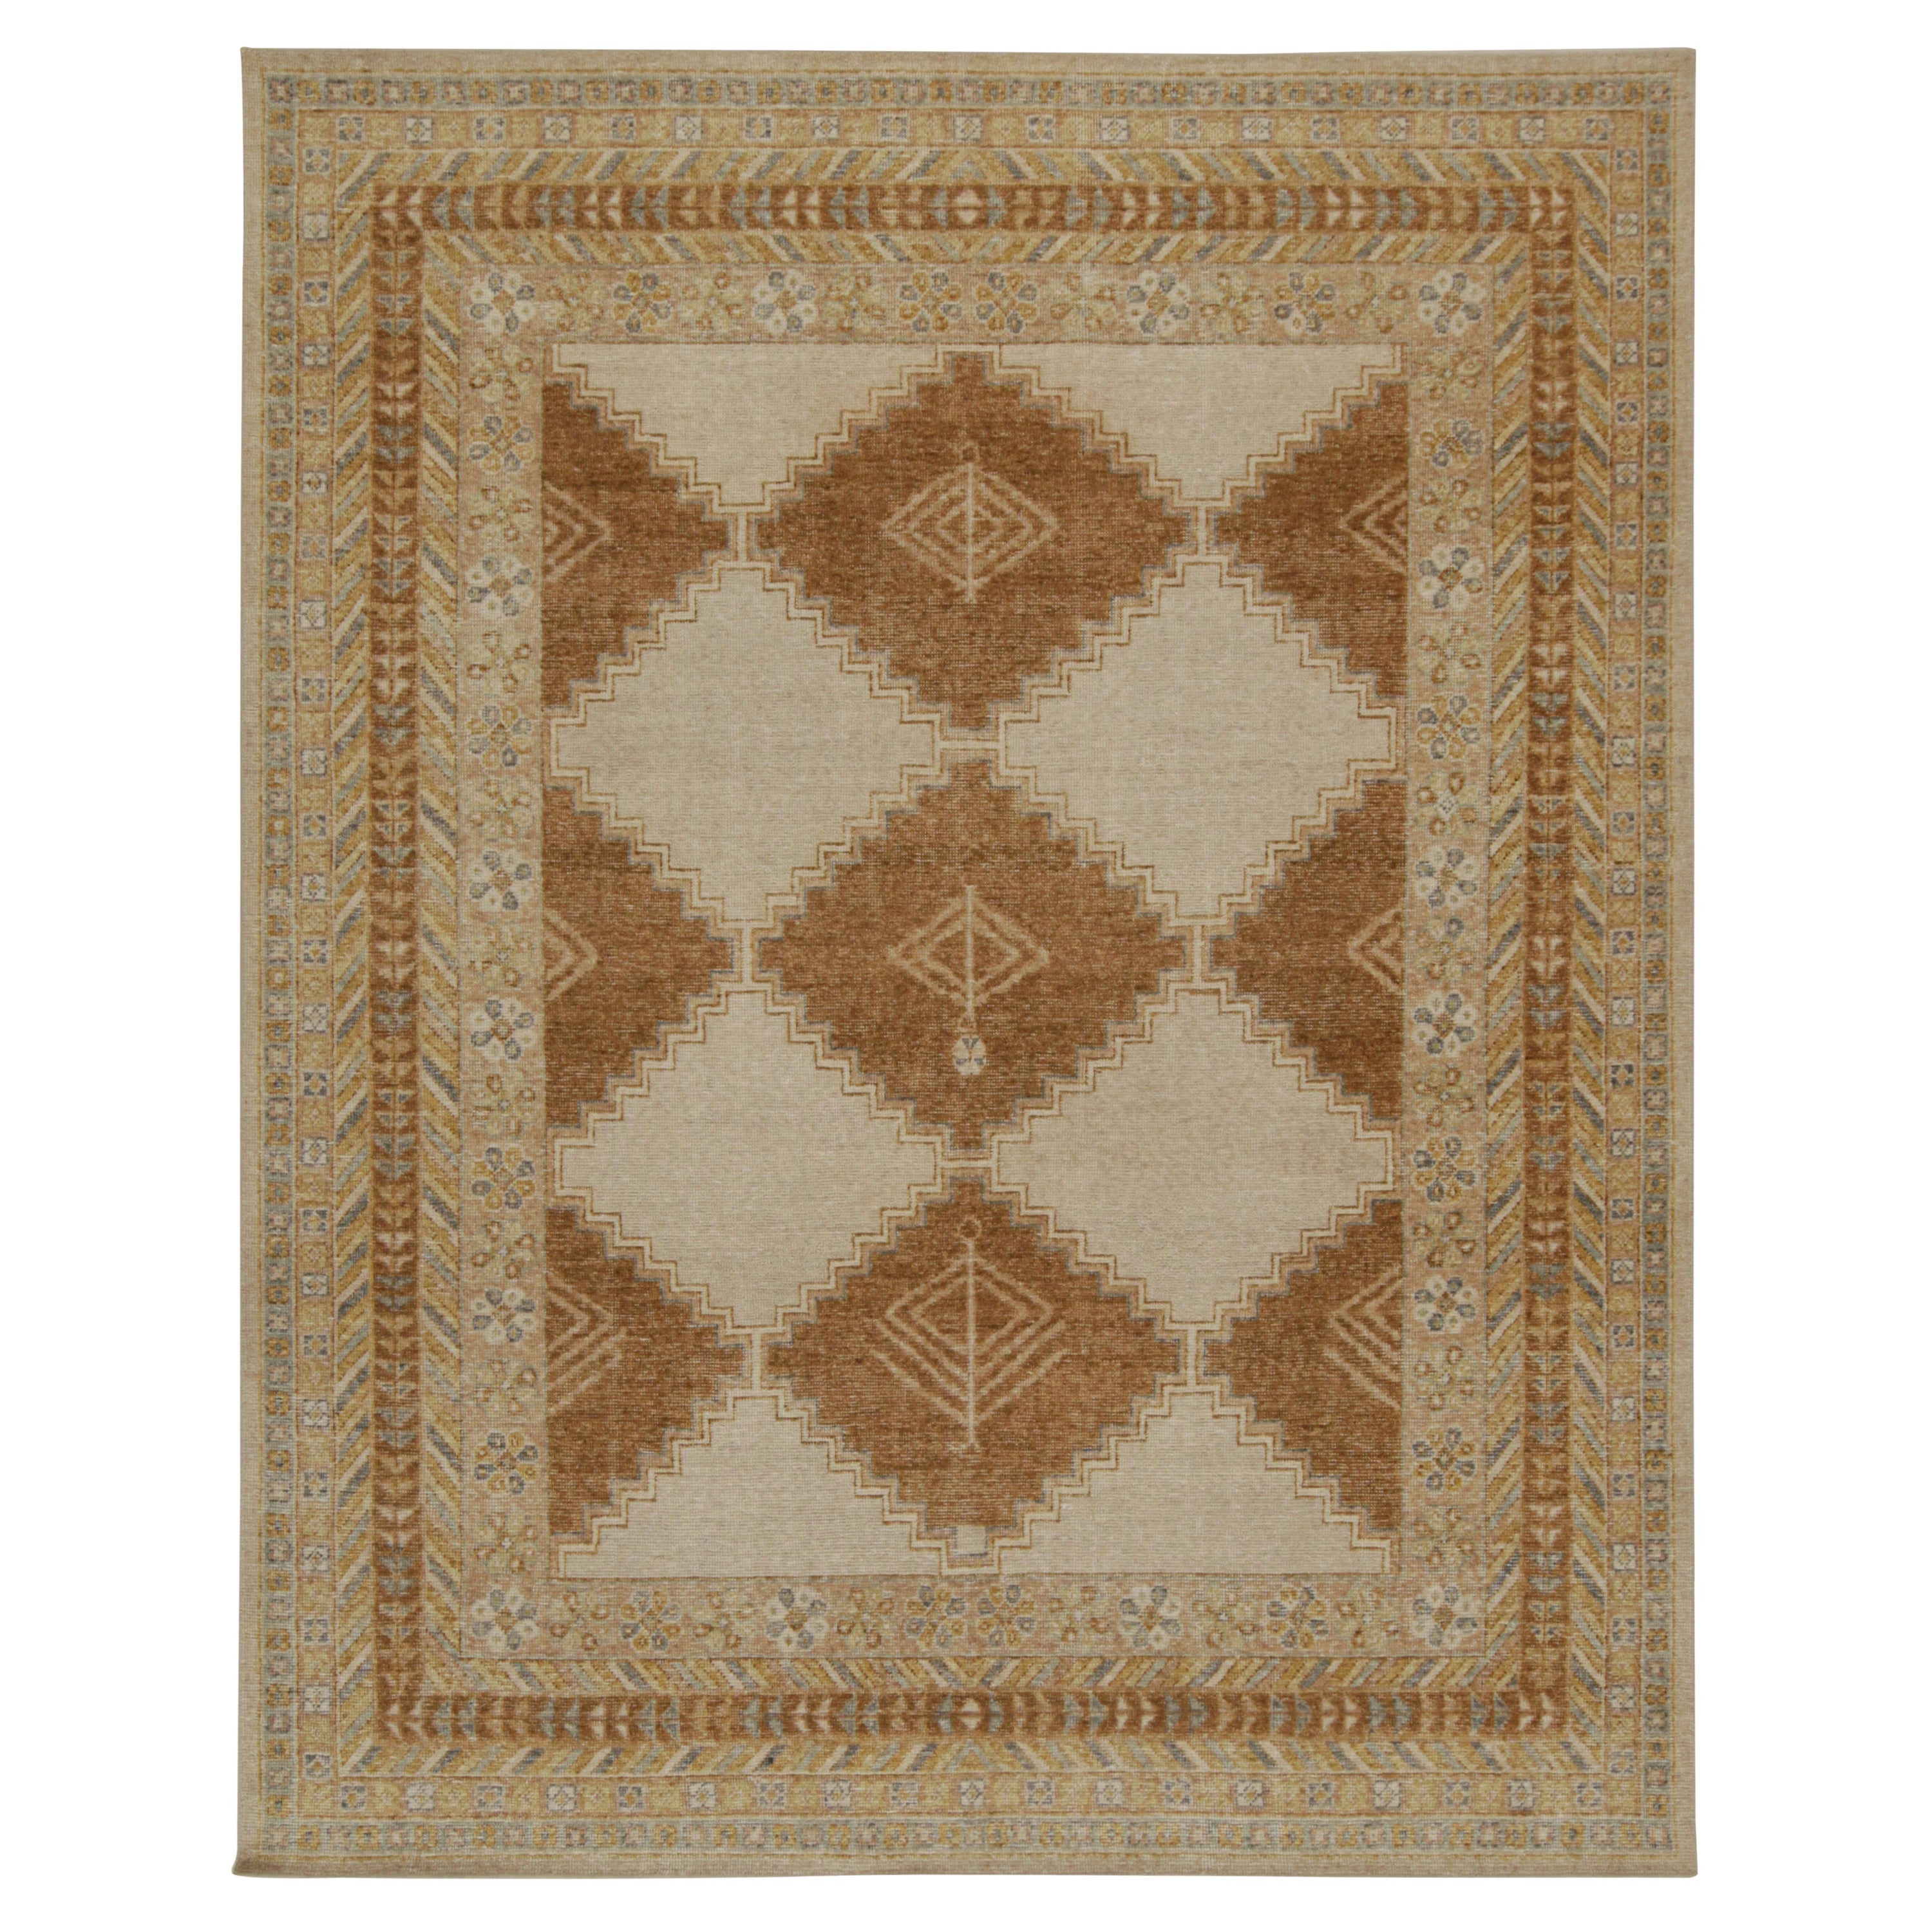 Rug & Kilim’s Distressed Tribal Style Rug in Beige, Brown and Gold Patterns